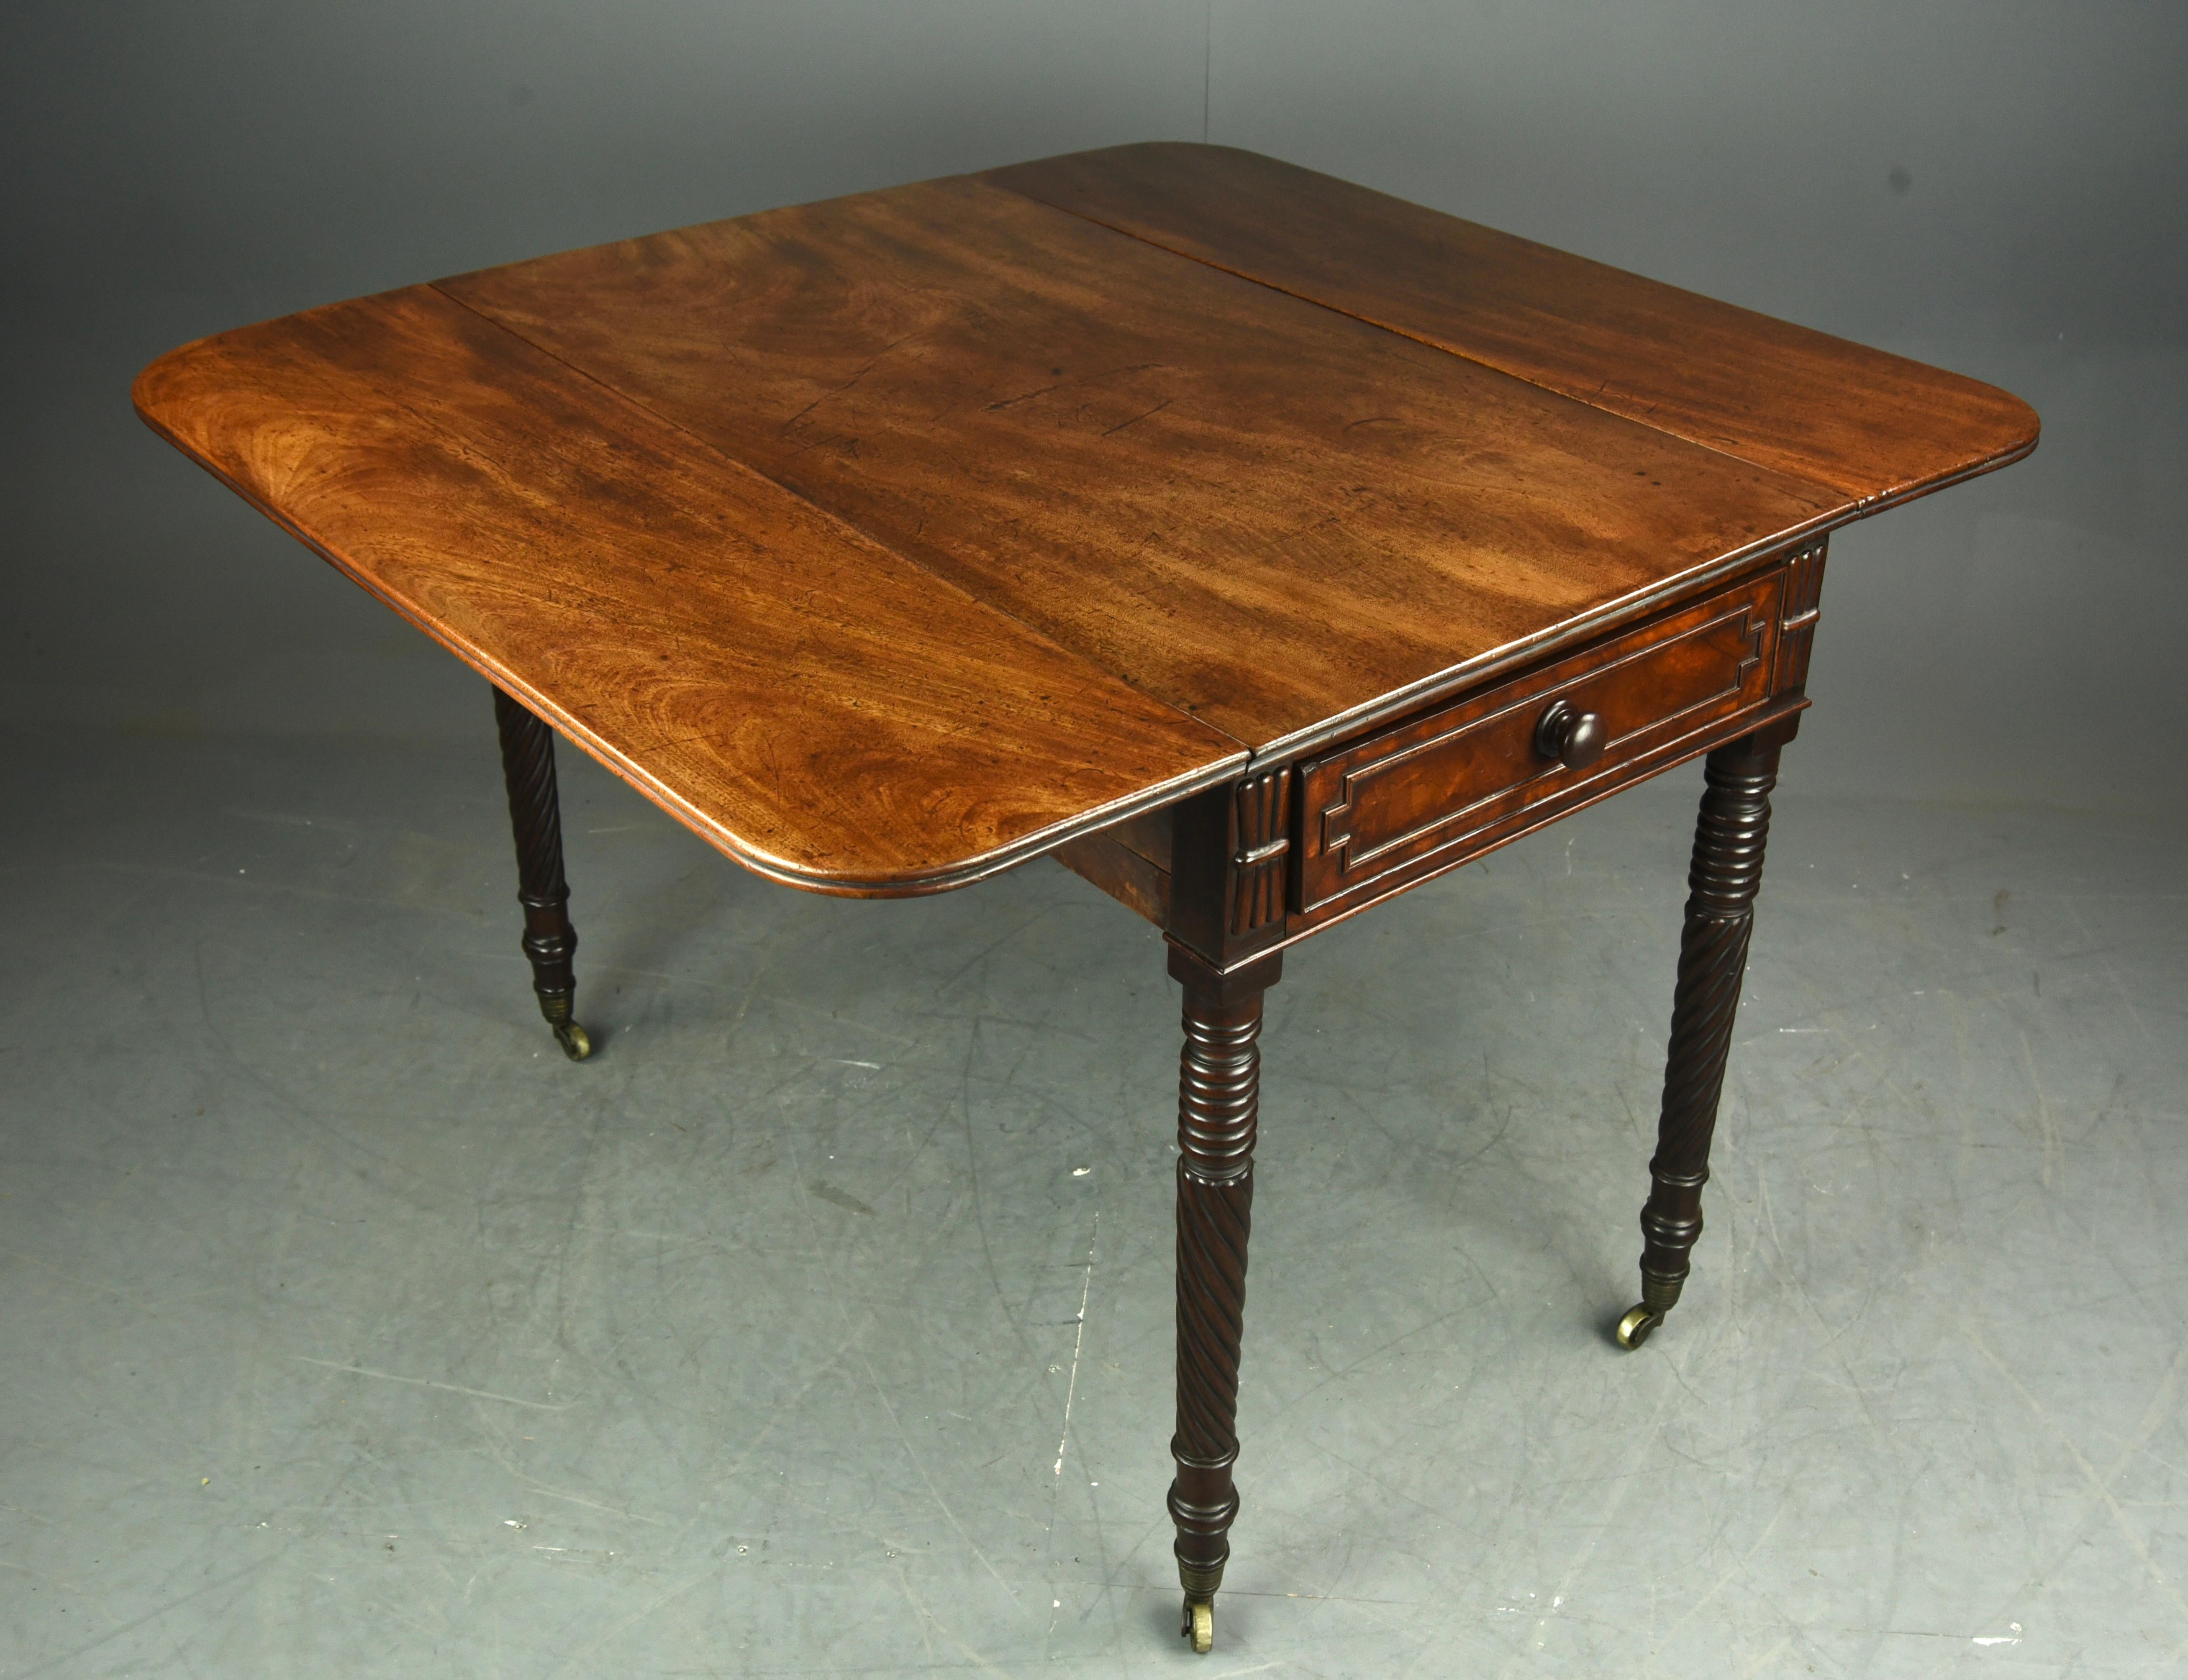 Here is a fine quality English Georgian solid mahogany drop leaf Pembroke table, circa 1770, in very good original condition. The table is constructed of top quality solid Cuban mahogany timber and boasts a stunning grain configuration to the